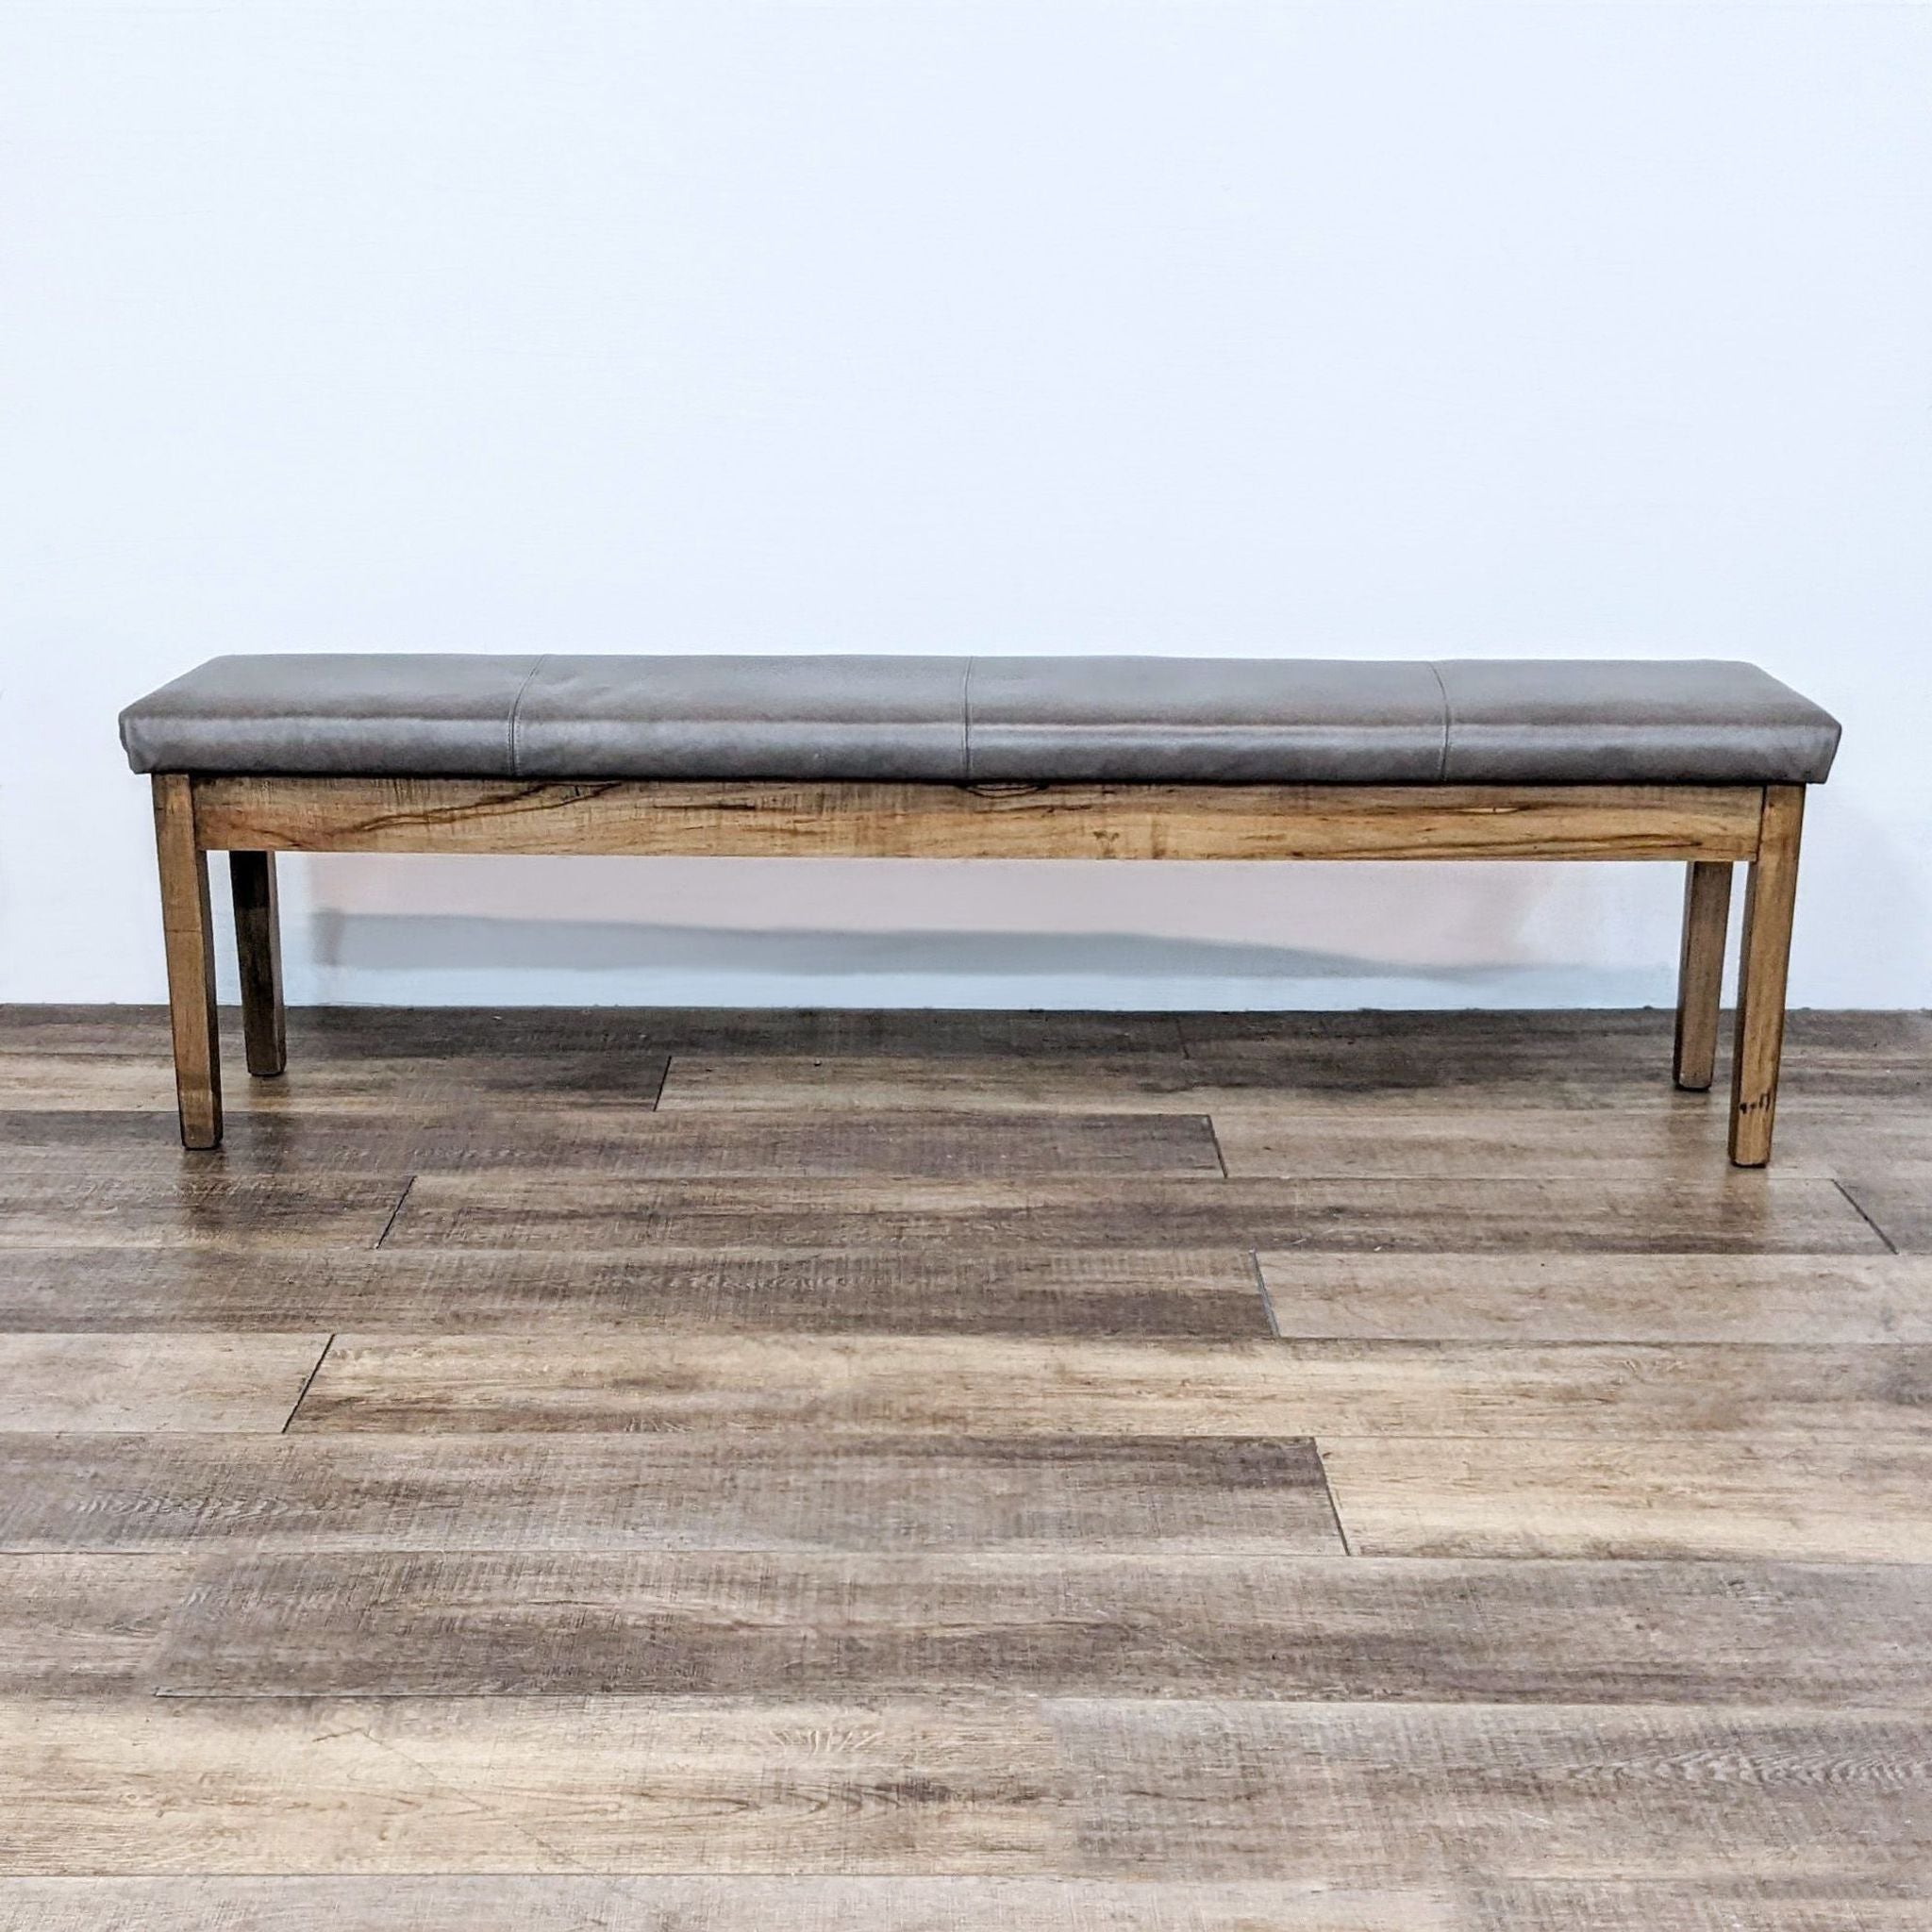 Alt text 1: Bassett 70" wooden bench with a gray padded leather look seat, displayed in a room with wood-patterned flooring.